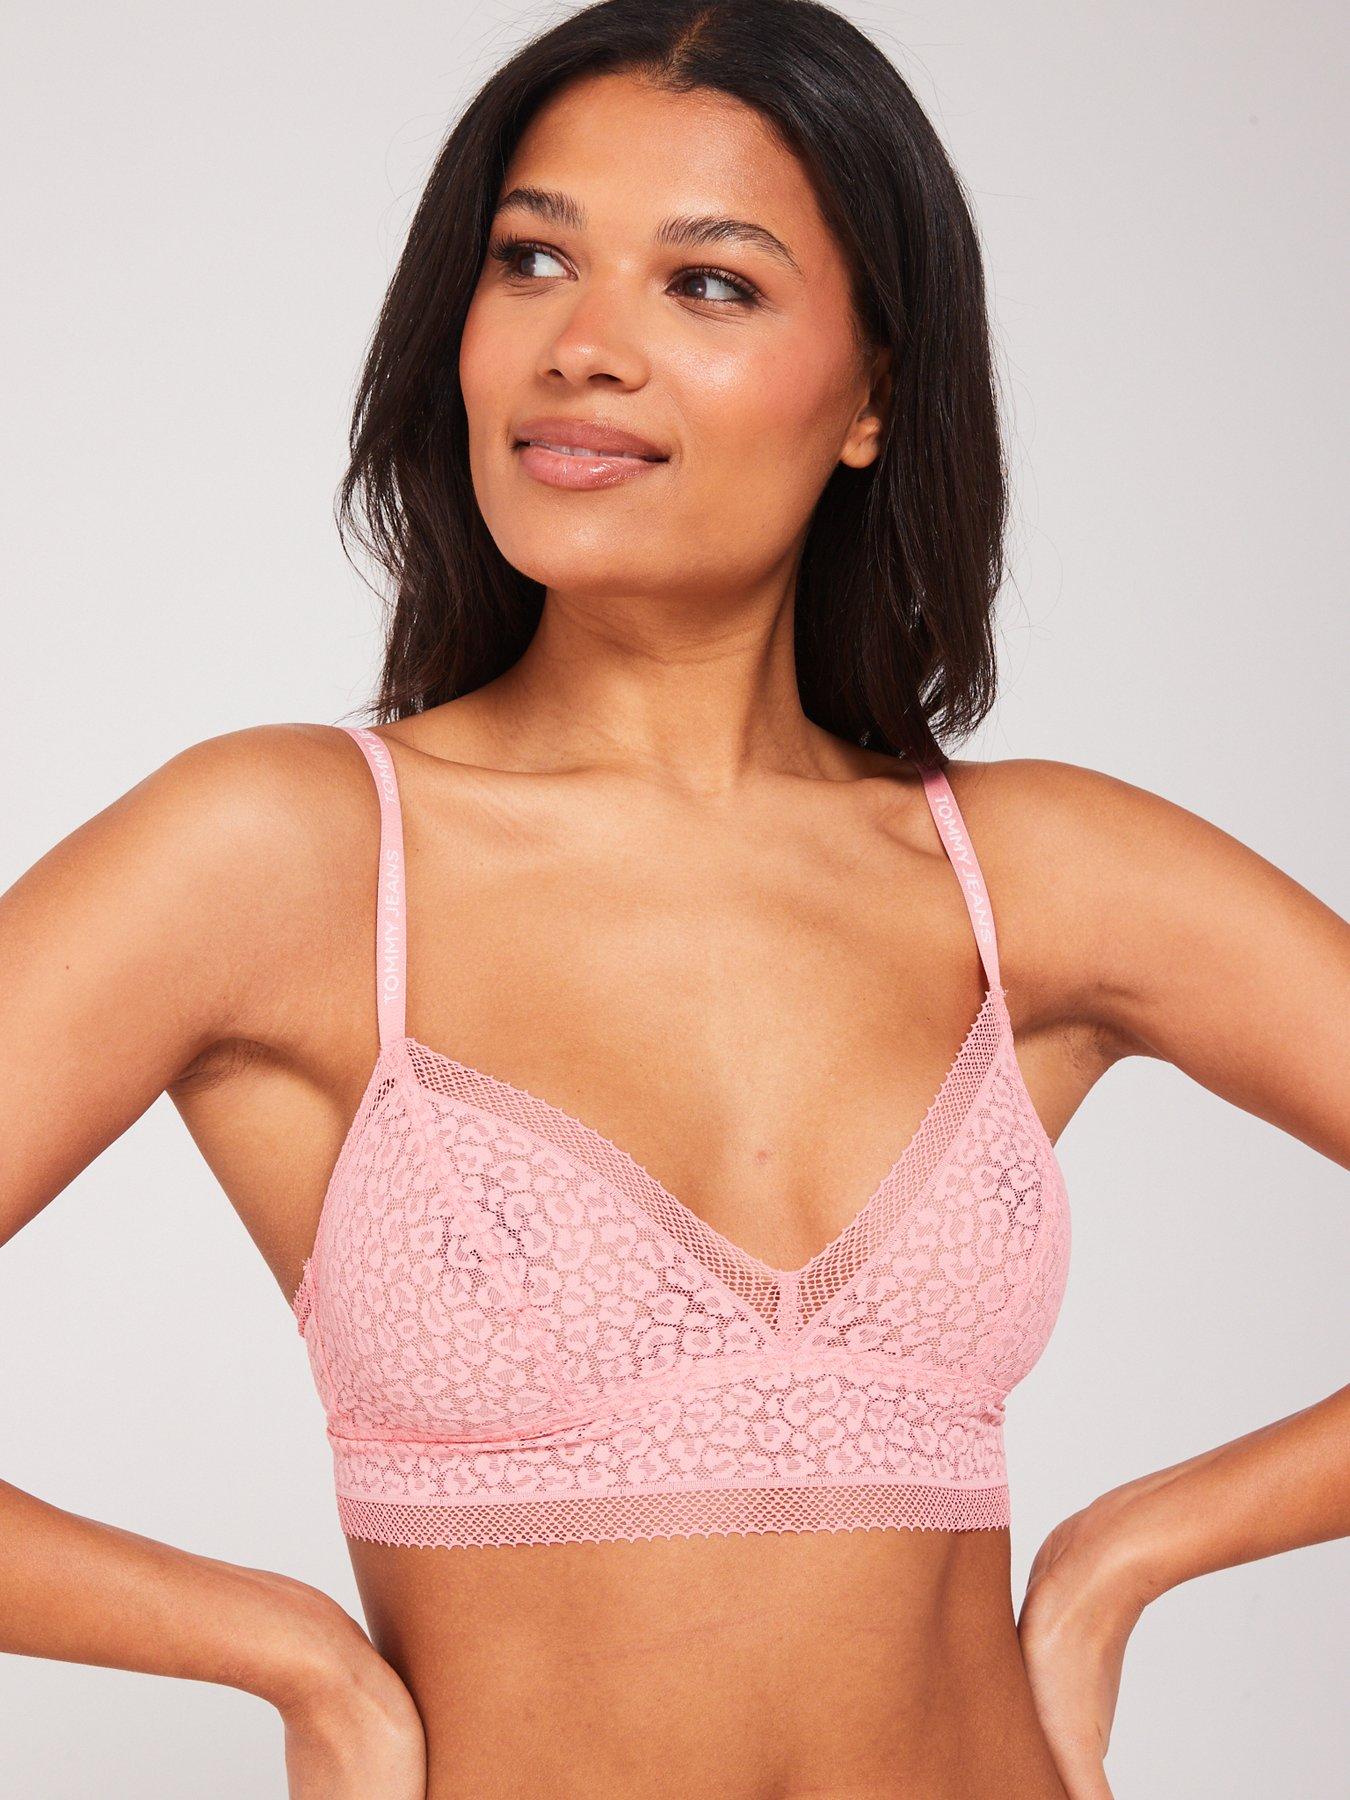 https://media.littlewoods.com/i/littlewoods/VSSBE_SQ1_0000000063_PINK_MDf/tommy-jeans-heritage-lace-unlined-bralette-pink.jpg?$180x240_retinamobilex2$&$roundel_littlewoods$&p1_img=new_yellow_round